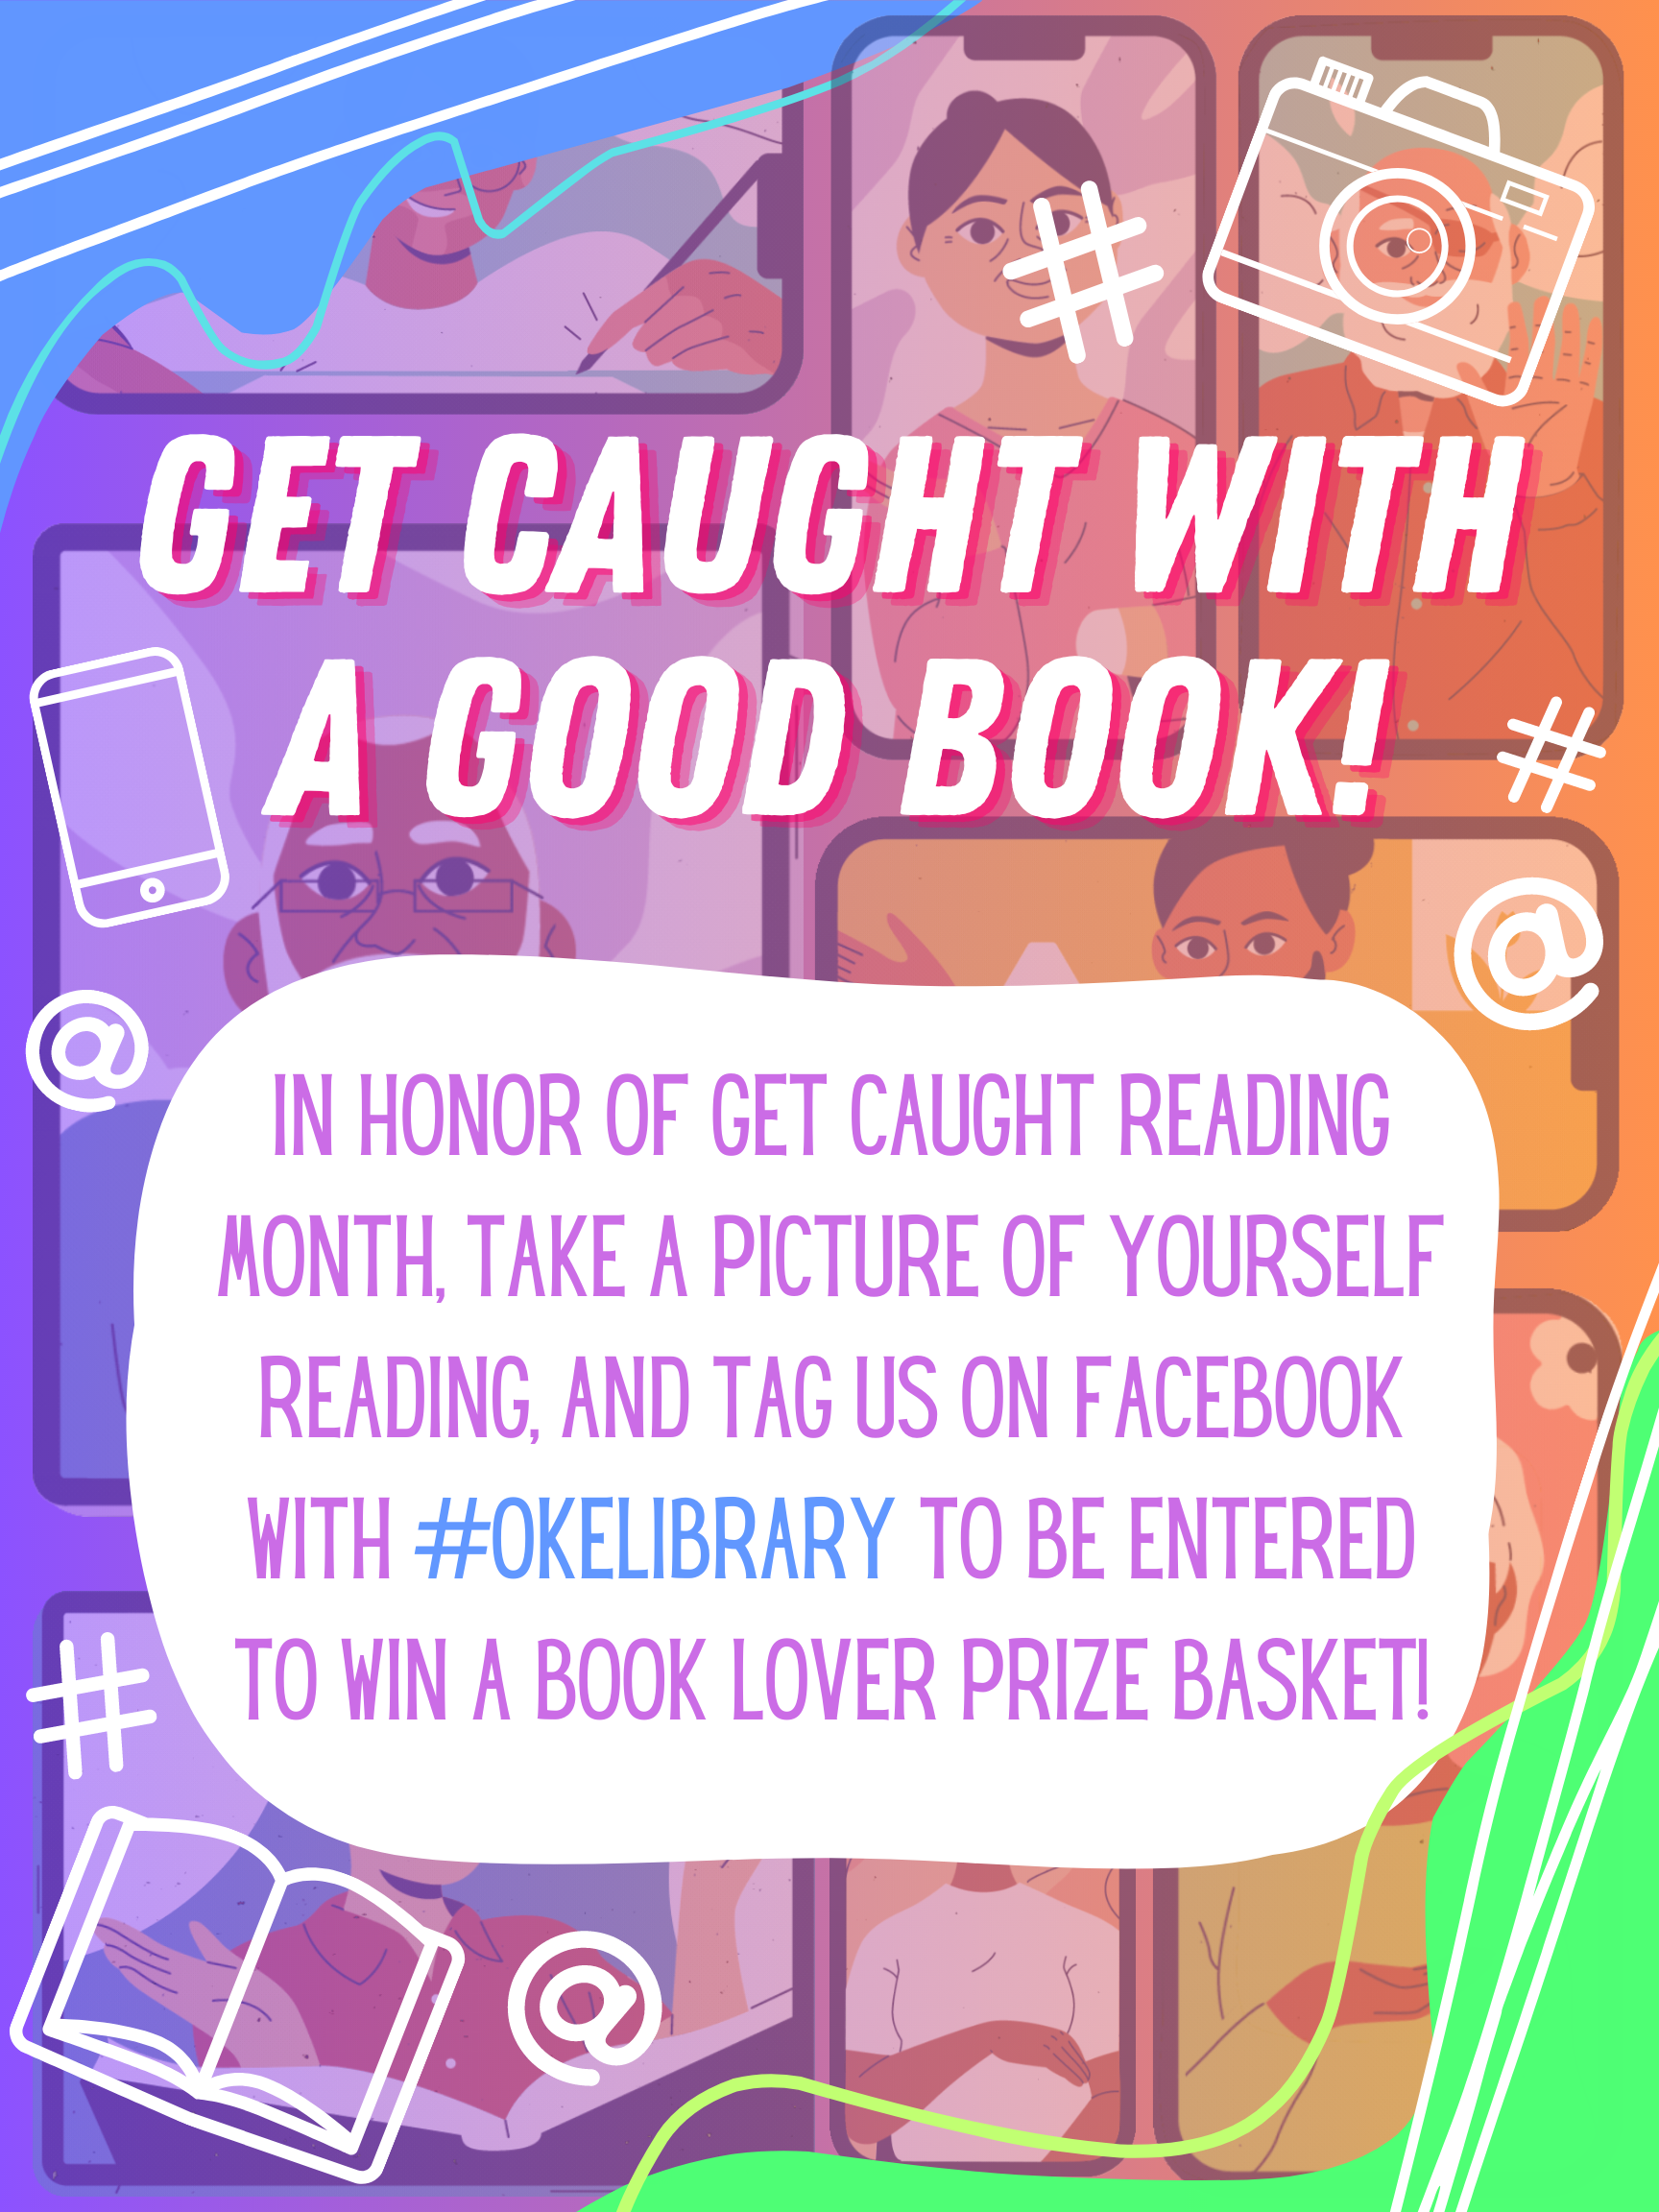 May is National Get Caught Reading Month! In honor of this the Okeechobee Library will be hosting Book Lover's Prize Basket Raffle!